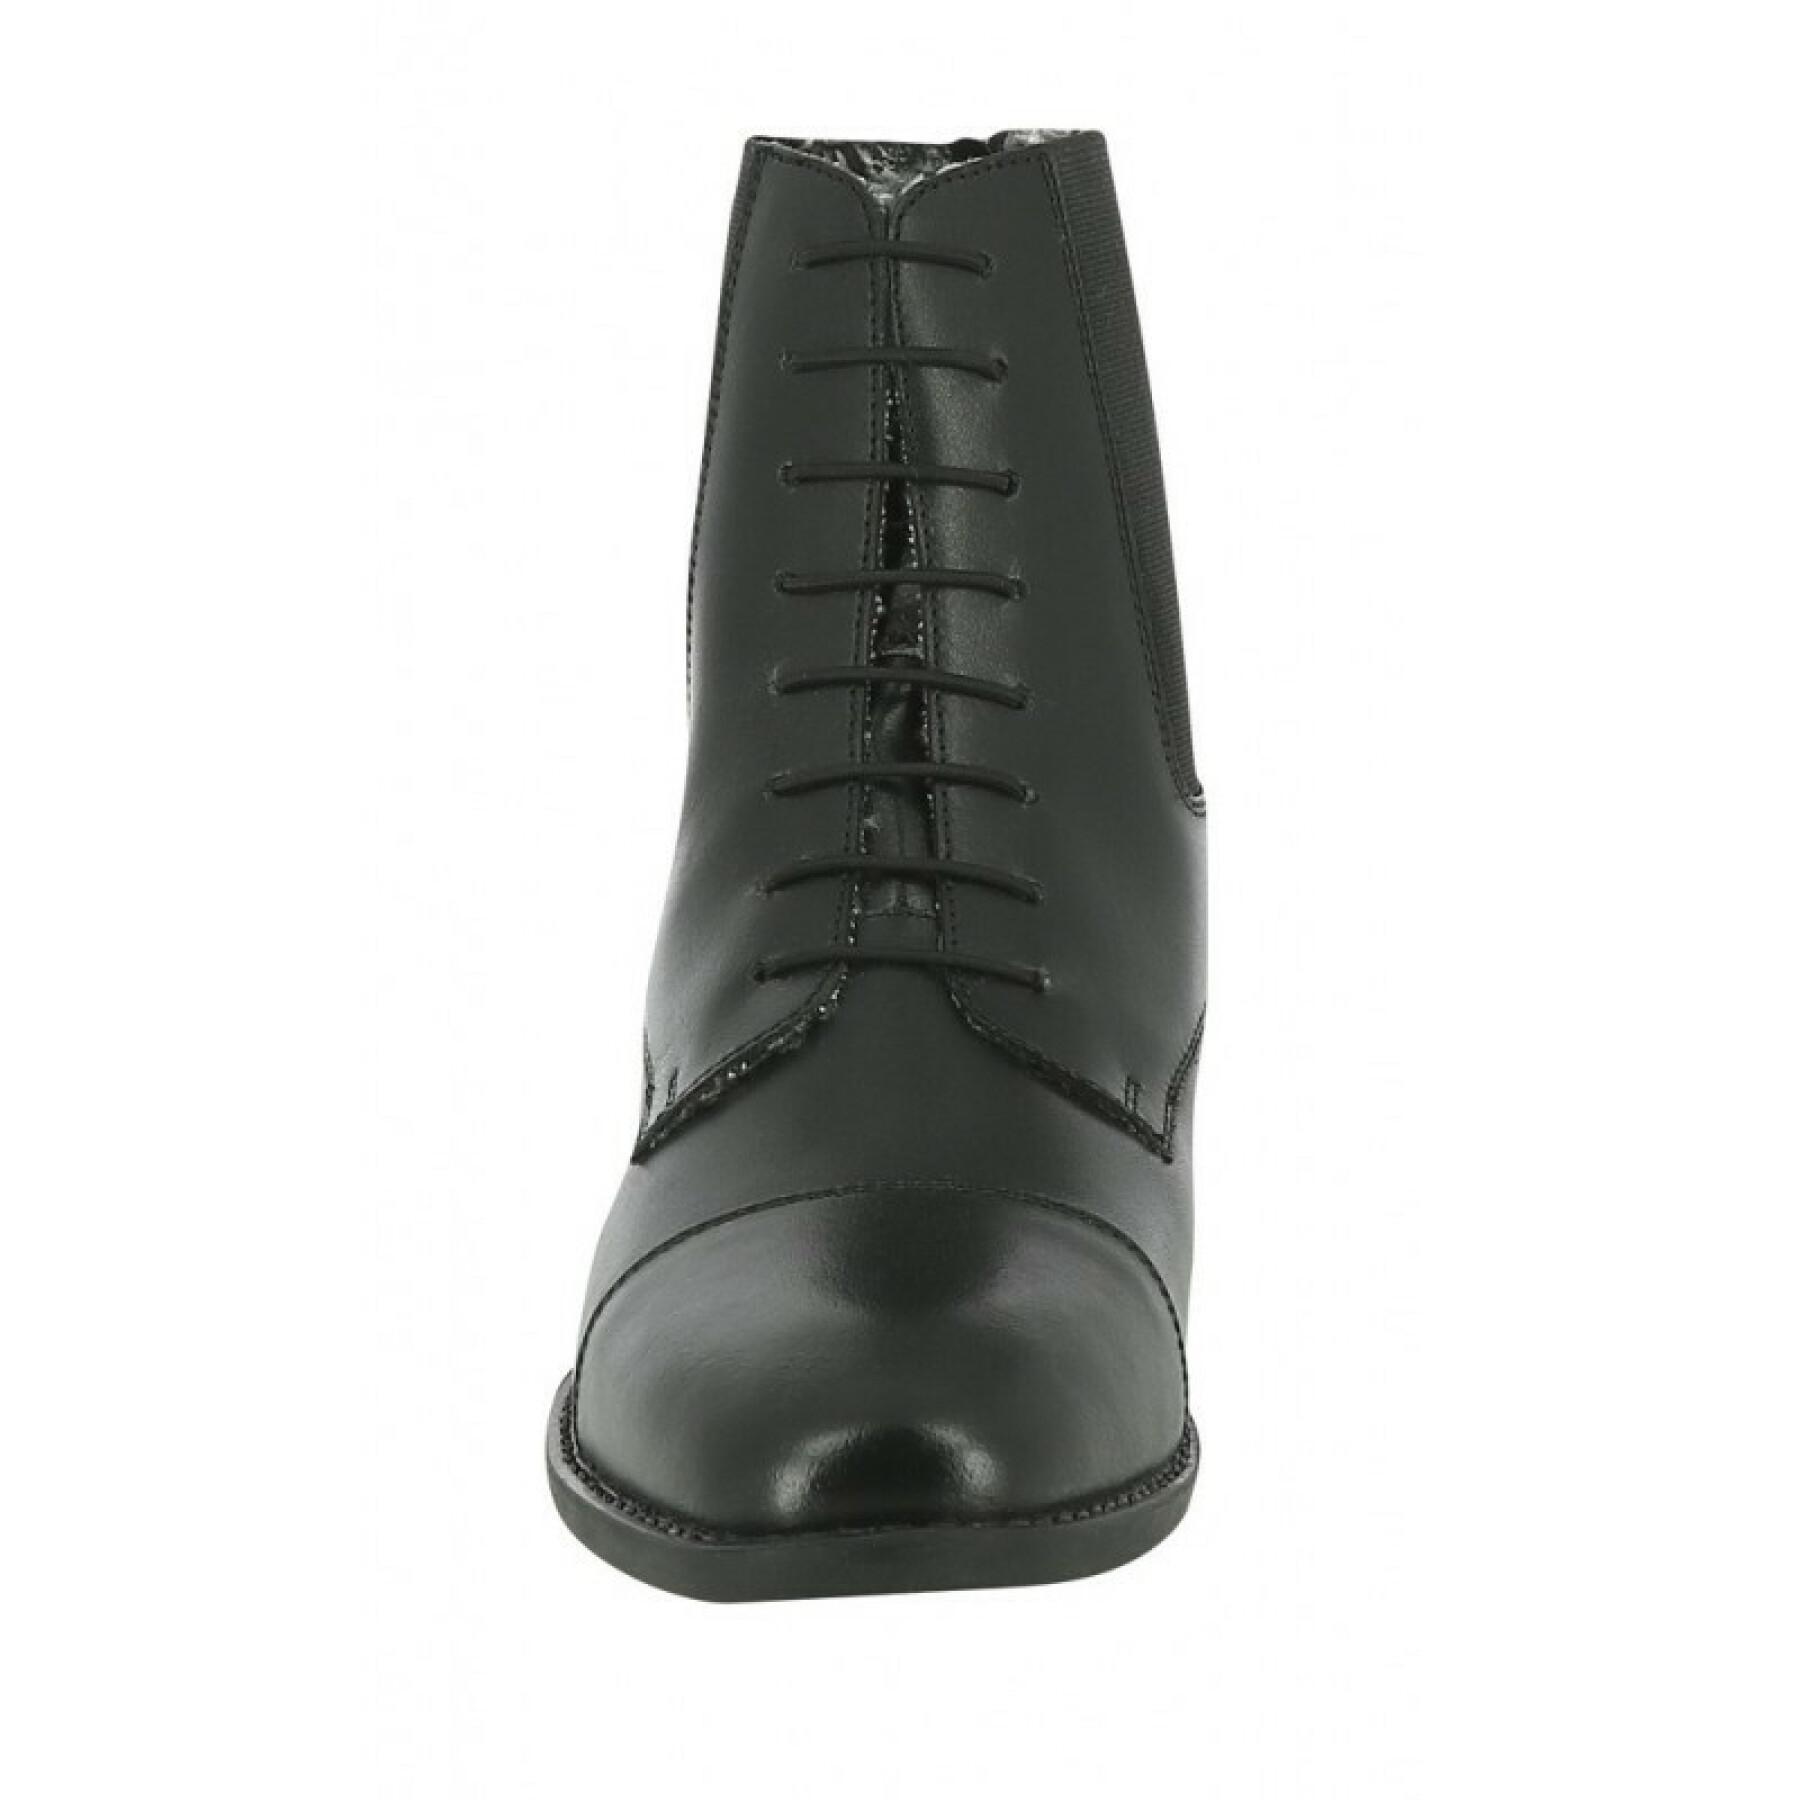 Women's lace-up riding boots with lining Norton